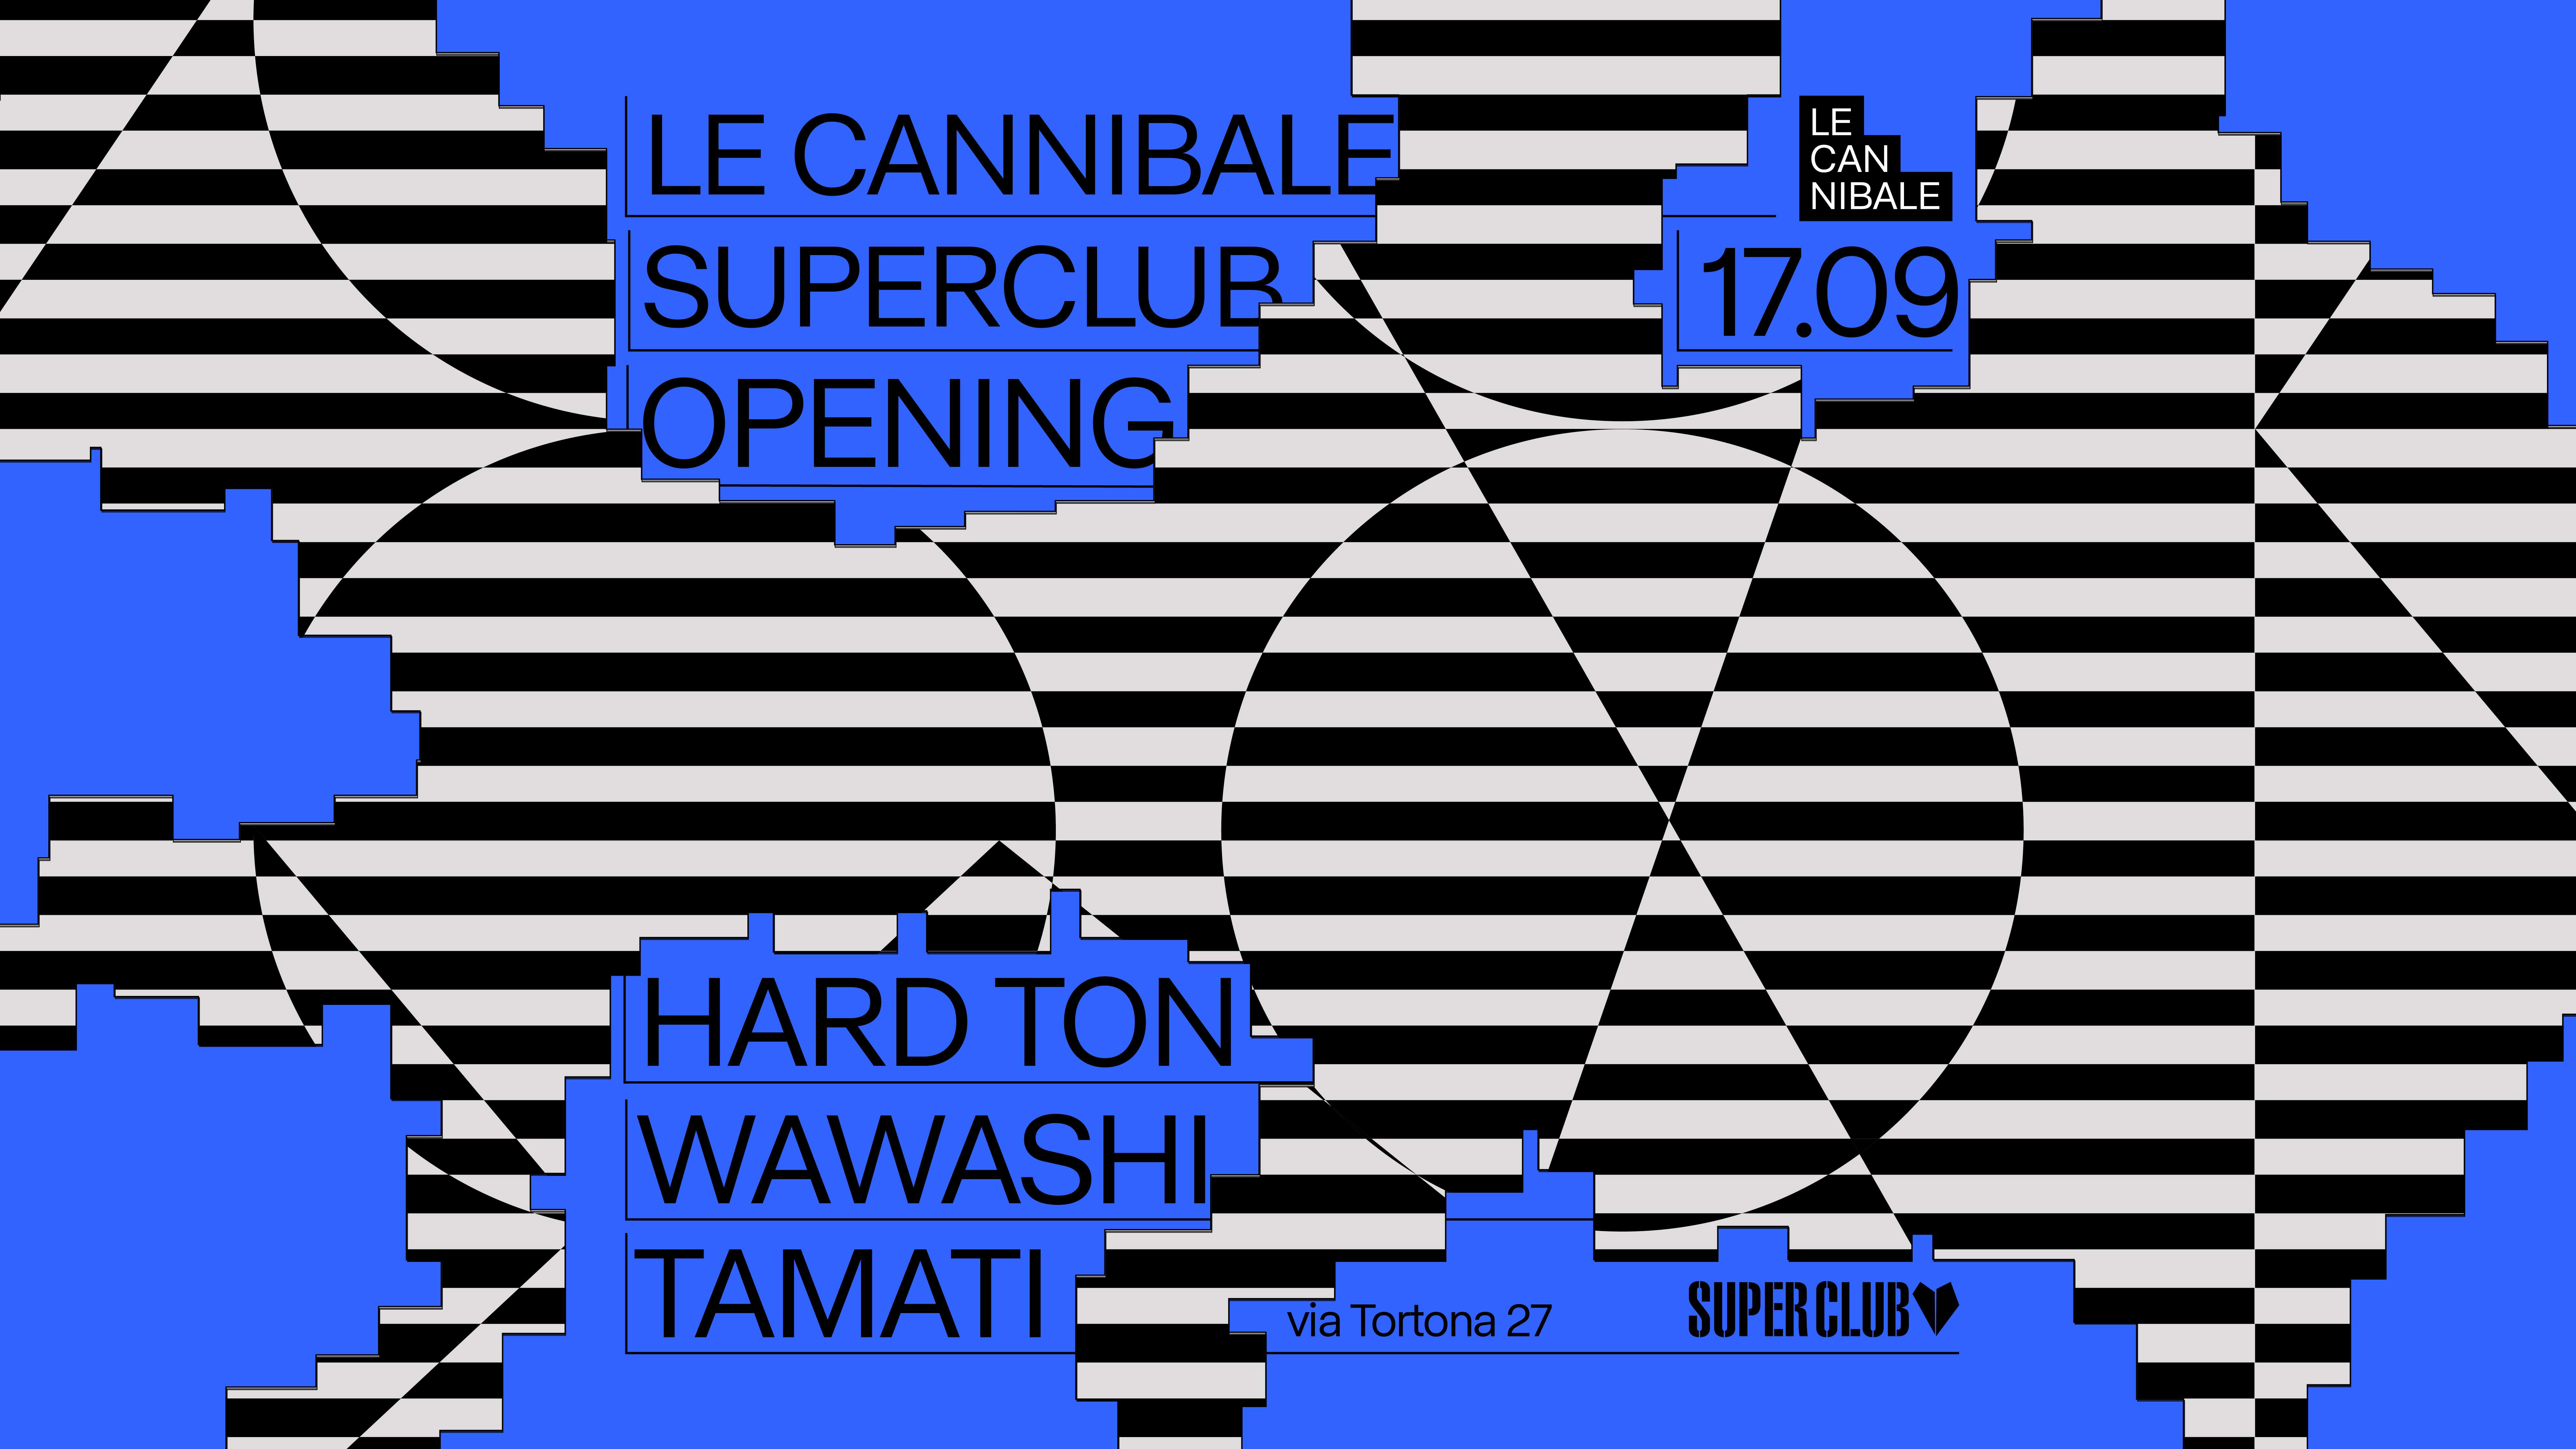 Le Cannibale Superclub - Opening - フライヤー表